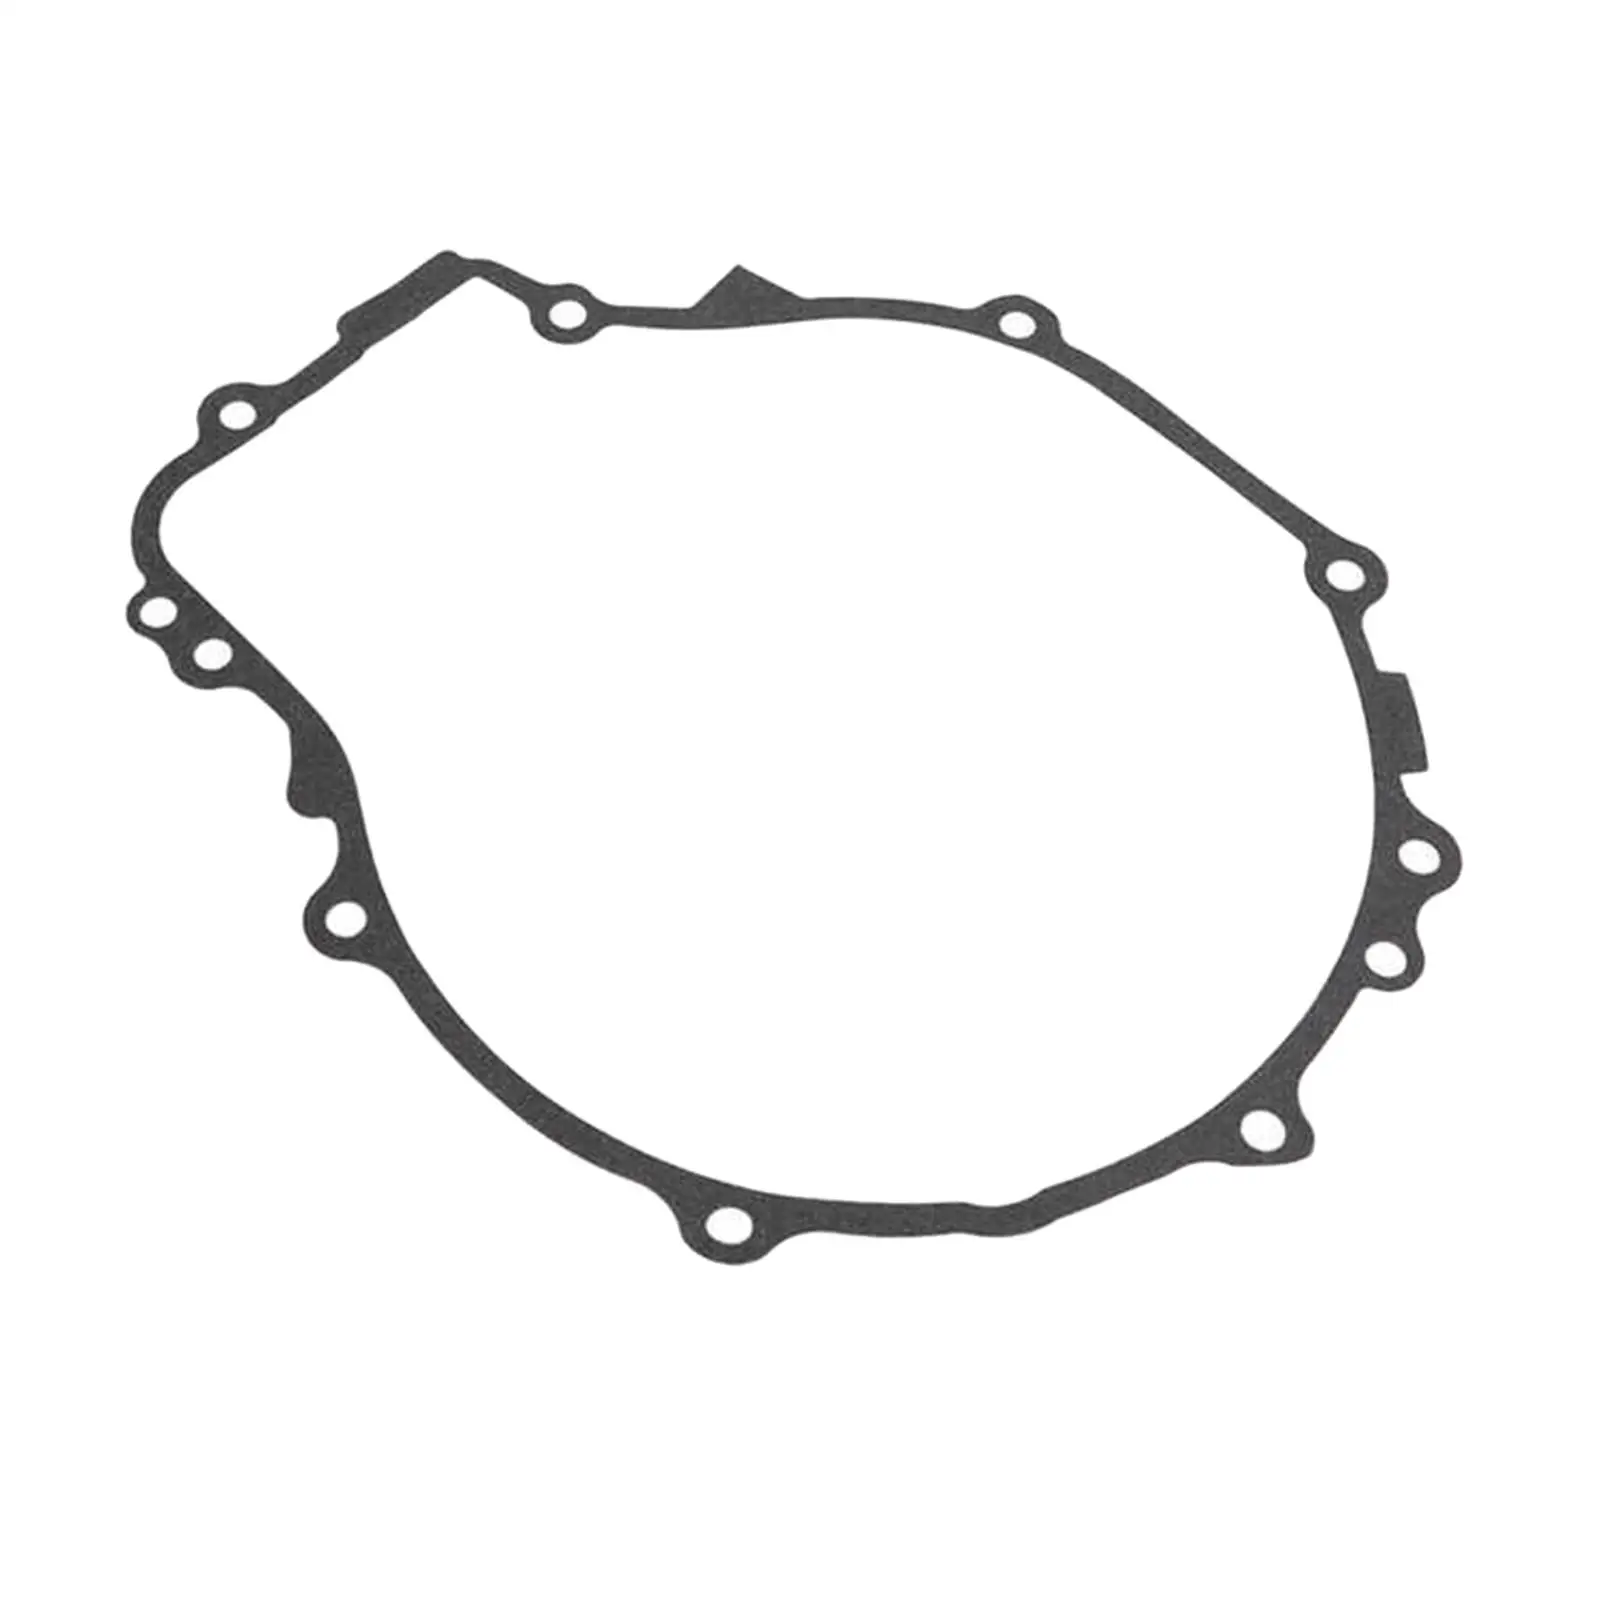 Car Pull Start Gasket 3084933 for Polaris Sportsman 500 Replace Easy